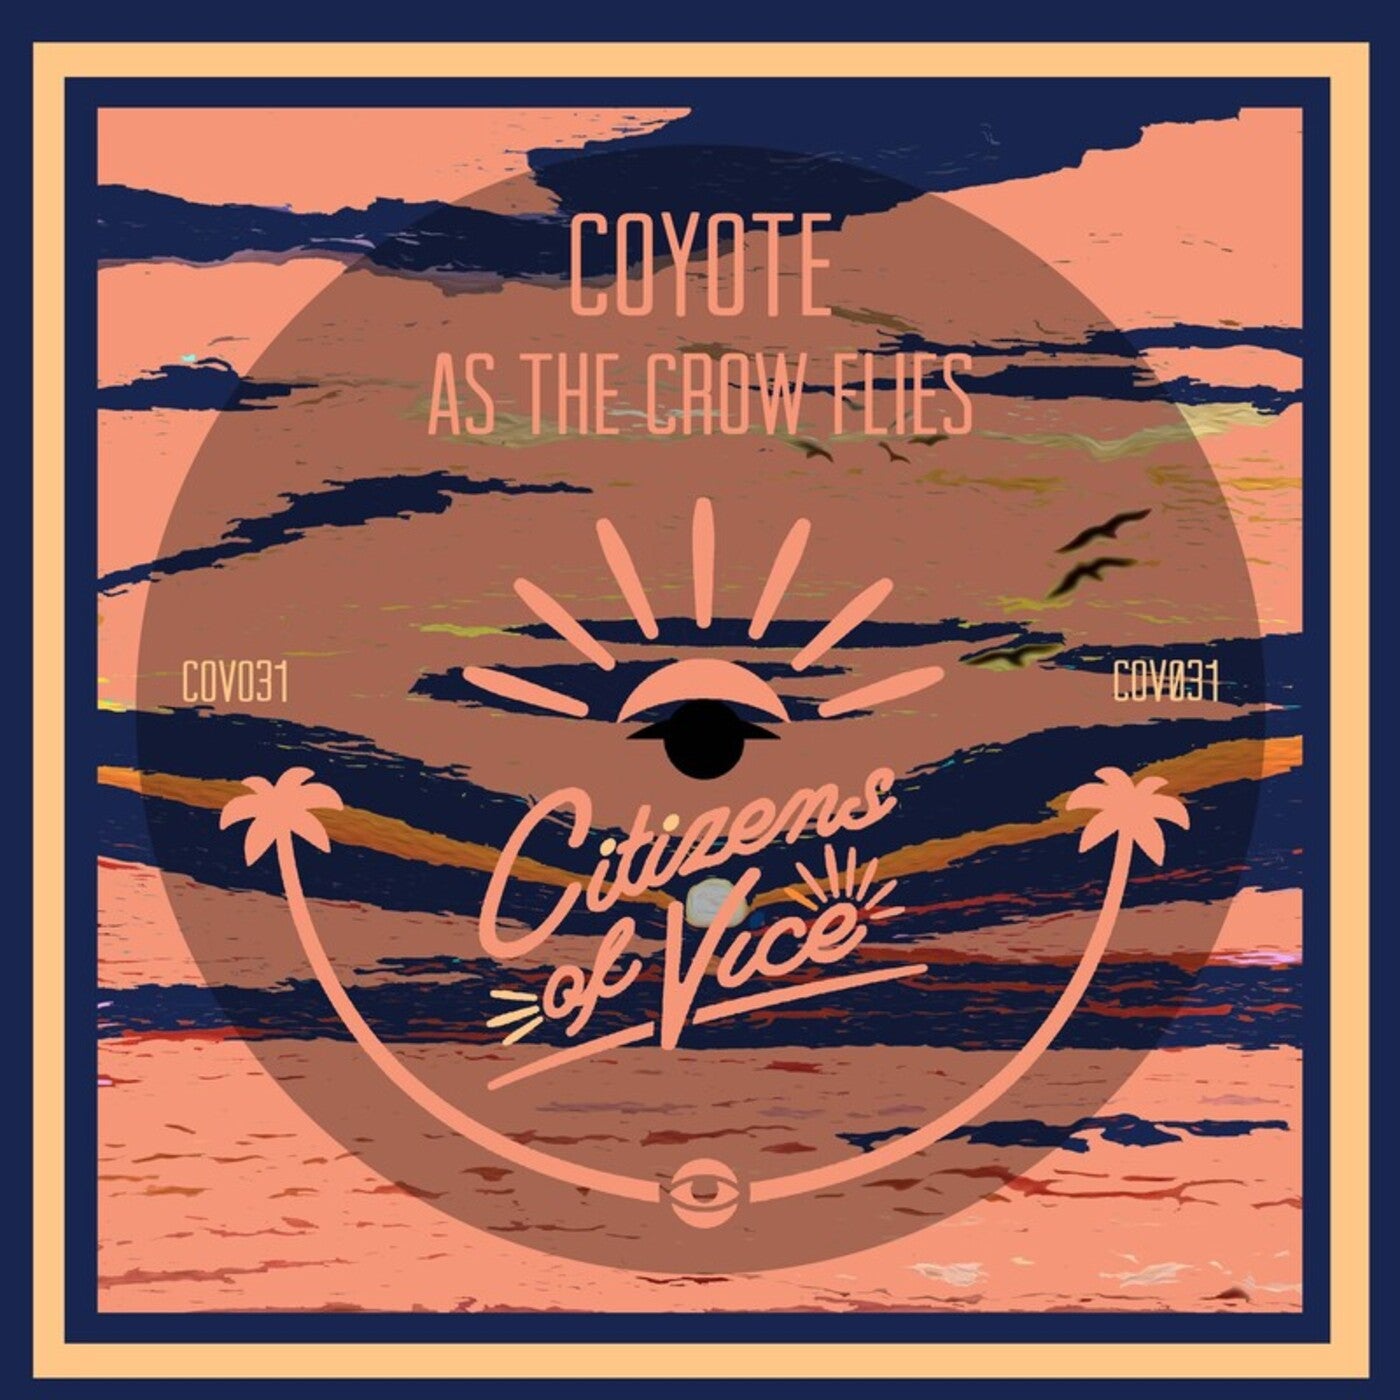 Coyote - As the Crow Flies [Citizens Of Vice]